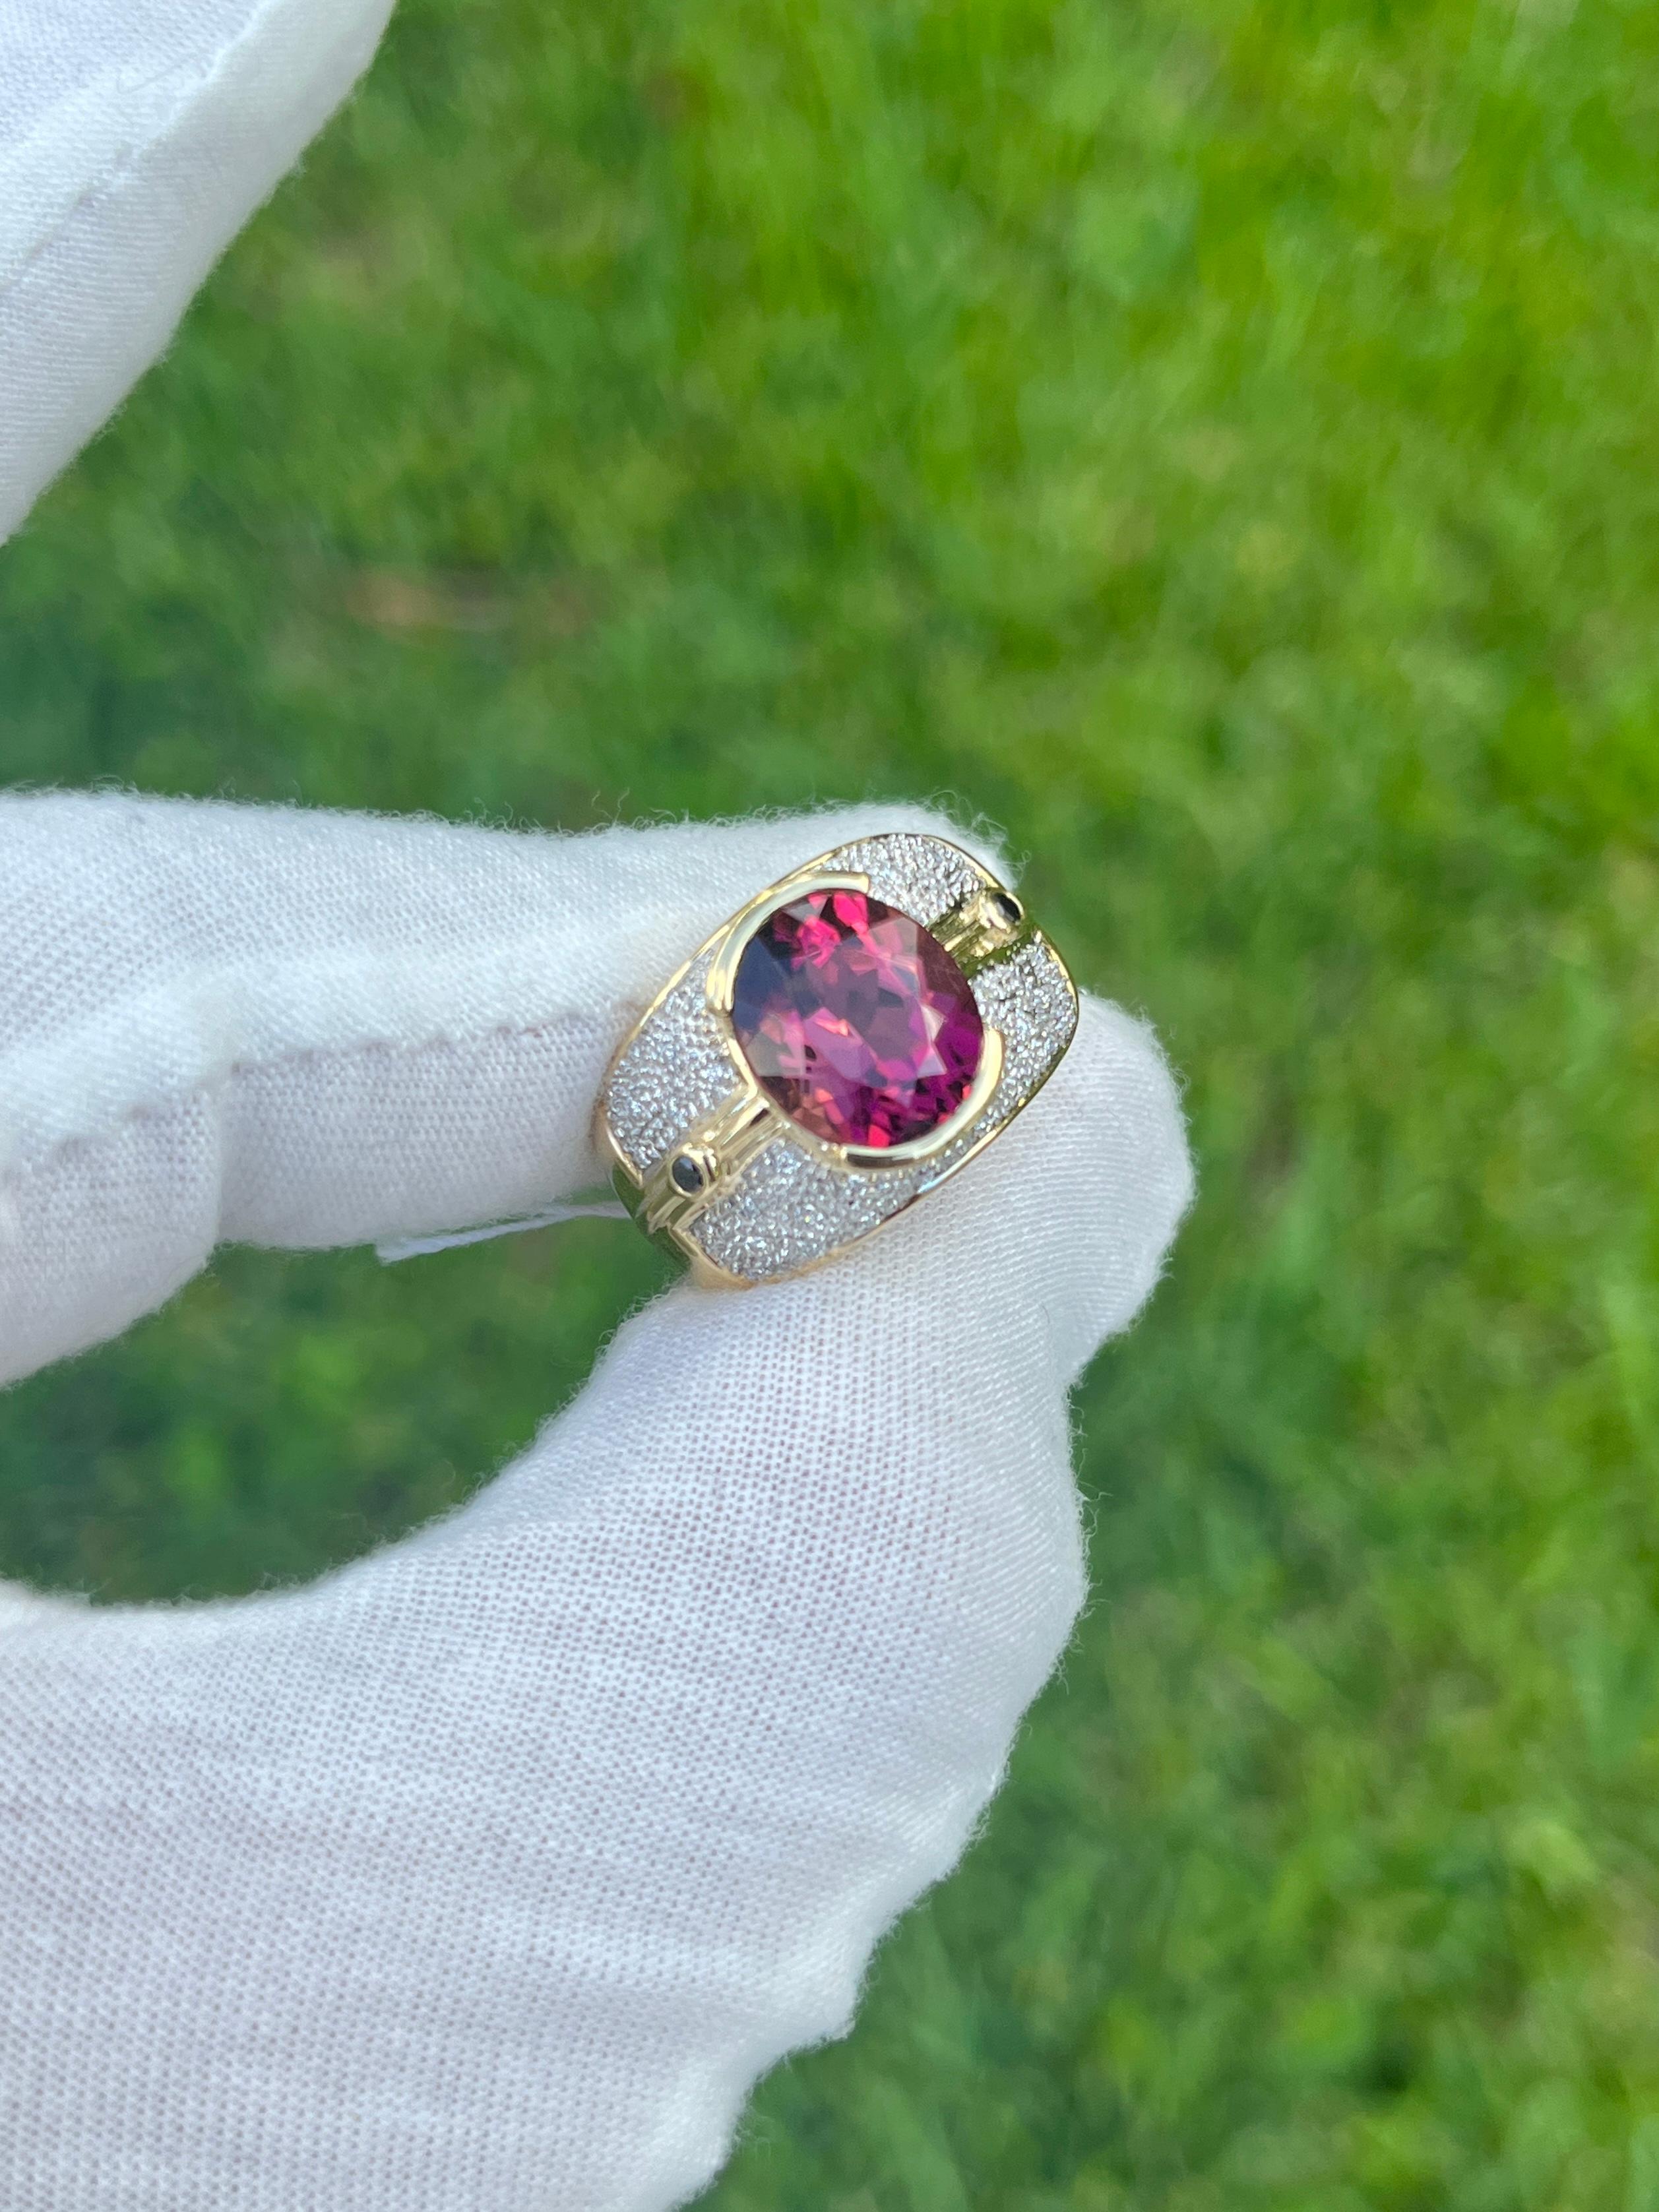 Vintage 6 Carat Pinkish Red Oval Cut Tourmaline Ring. Set in 18K Yellow Gold, this semi-precious gemstone ring weighs 11.5 grams and styles the a retro era look.

The exquisite oval-cut tourmaline, with a charismatic blend of pink and red hues,